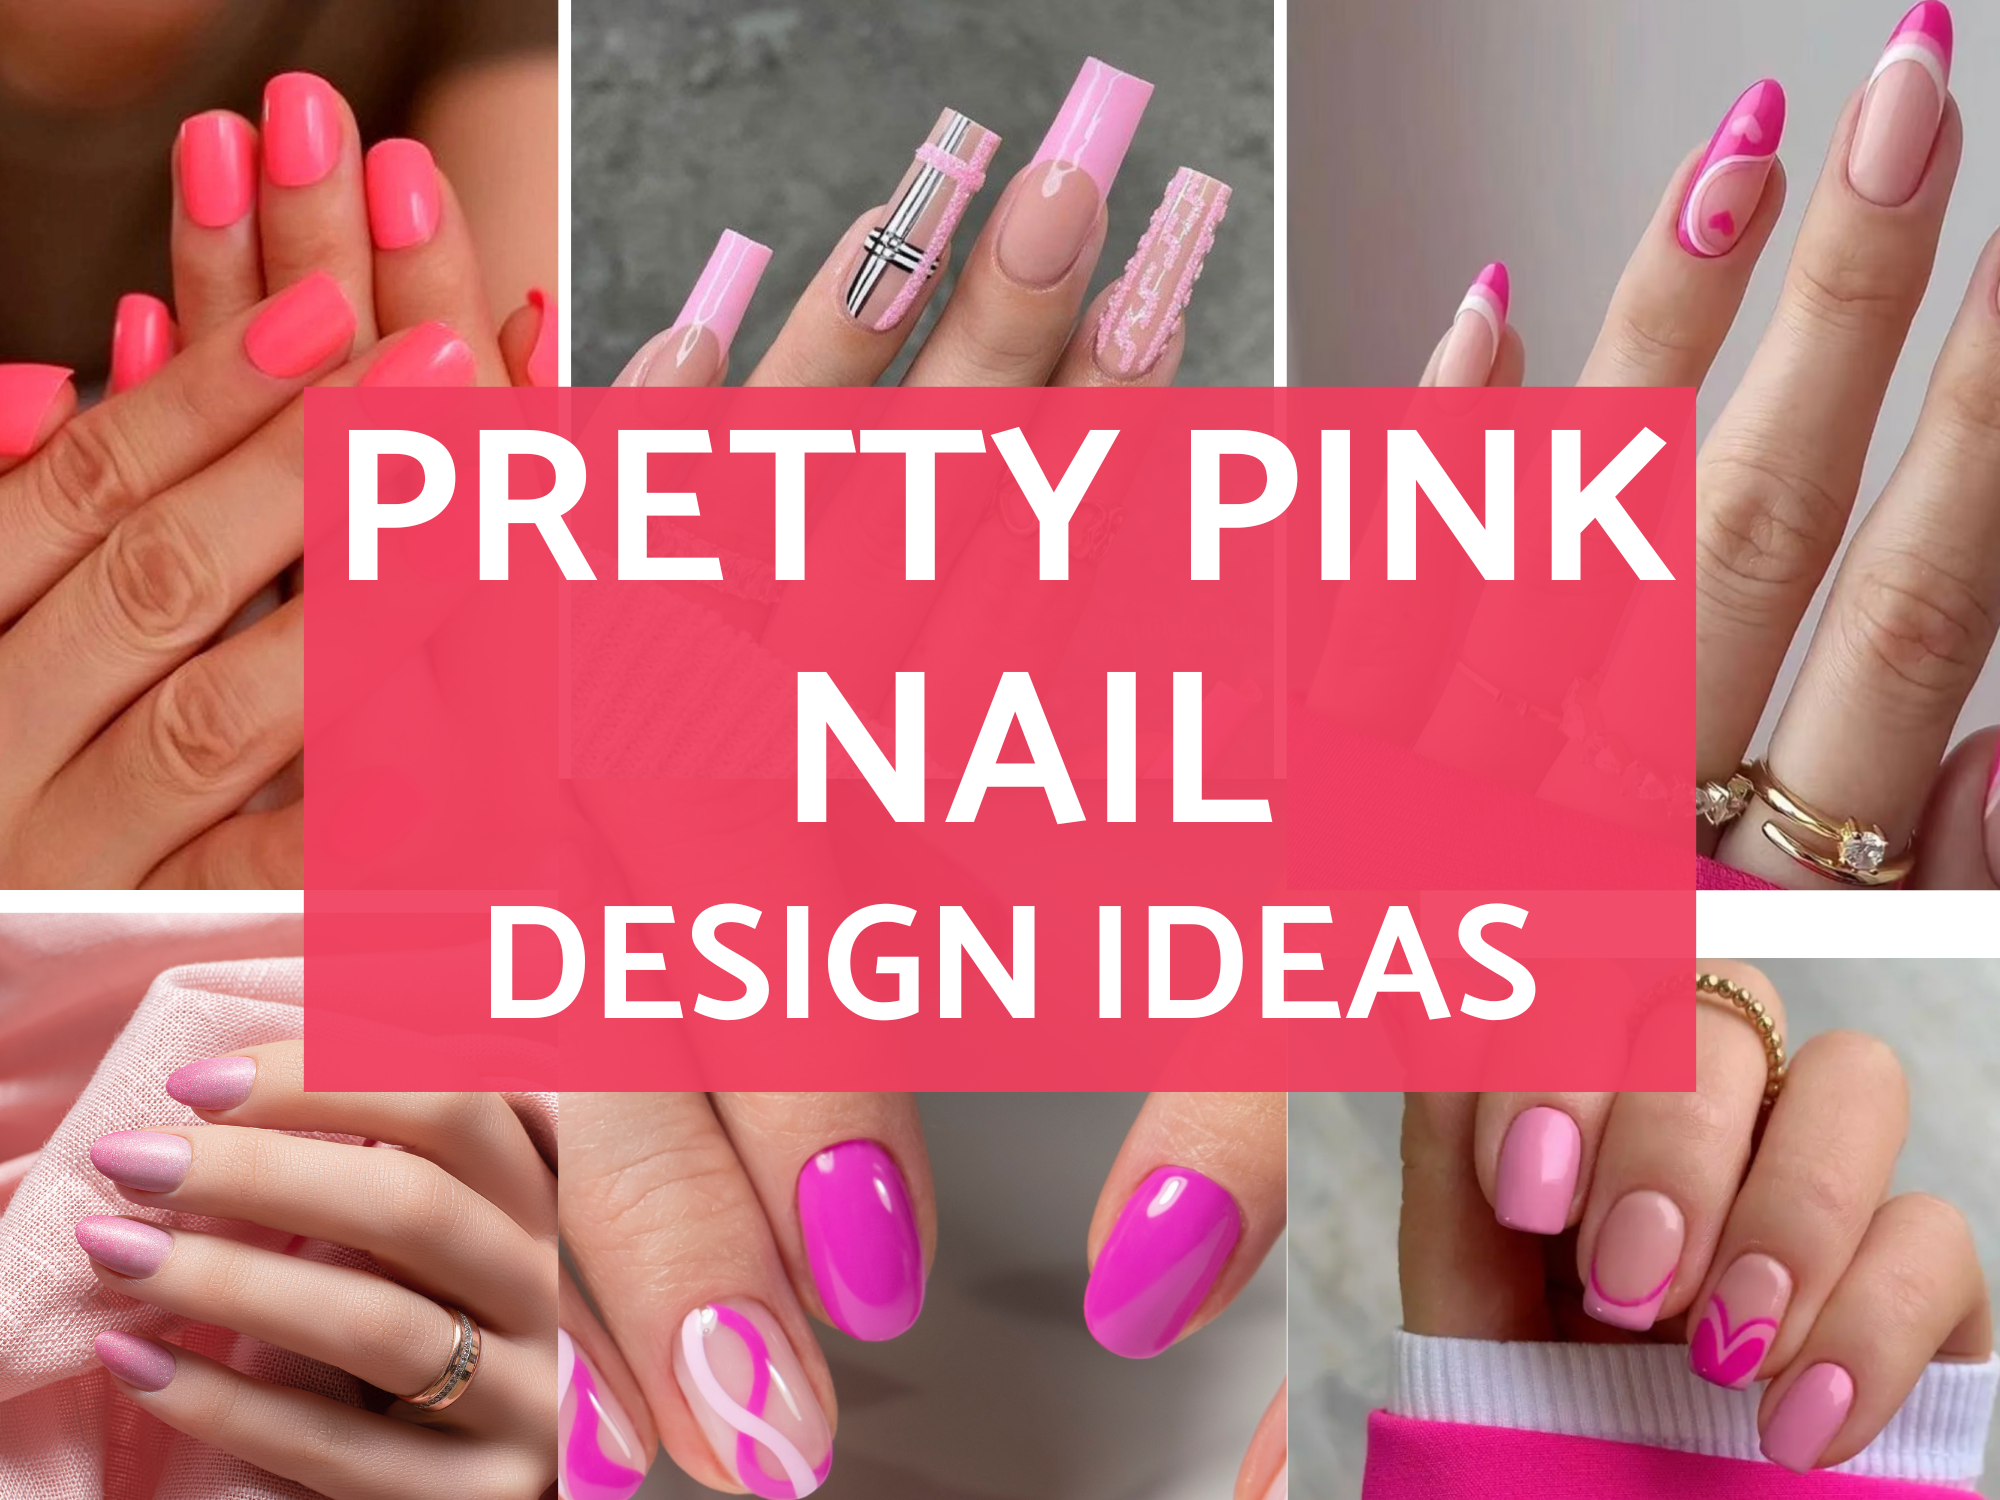 Barbie Nails Are Shaping Up To Be The Cutest Mani Trend This Summer |  Glamour UK